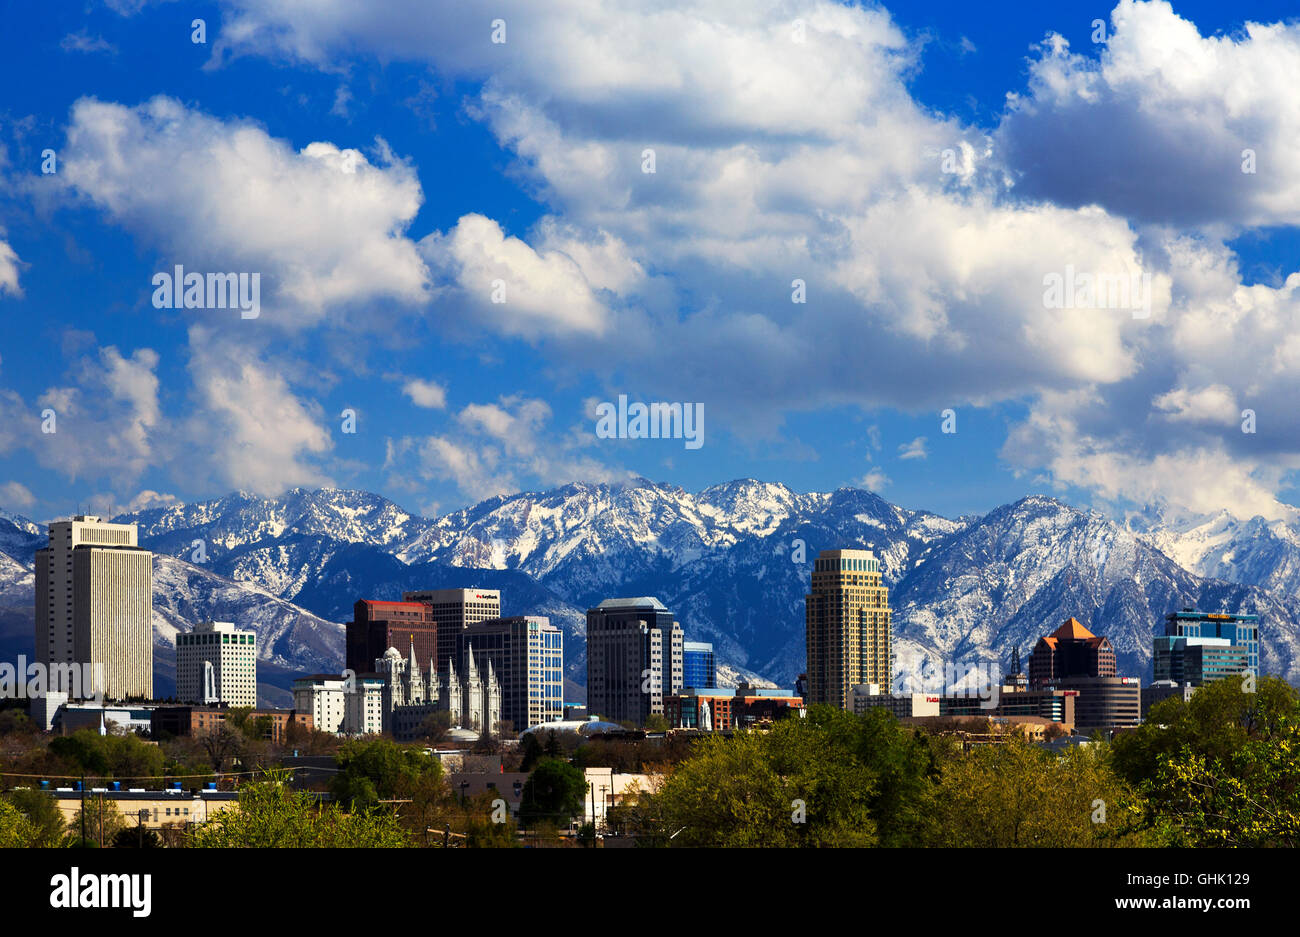 This is a view of the Salt Lake City Utah, USA skyline on a beautiful springtime day. Stock Photo